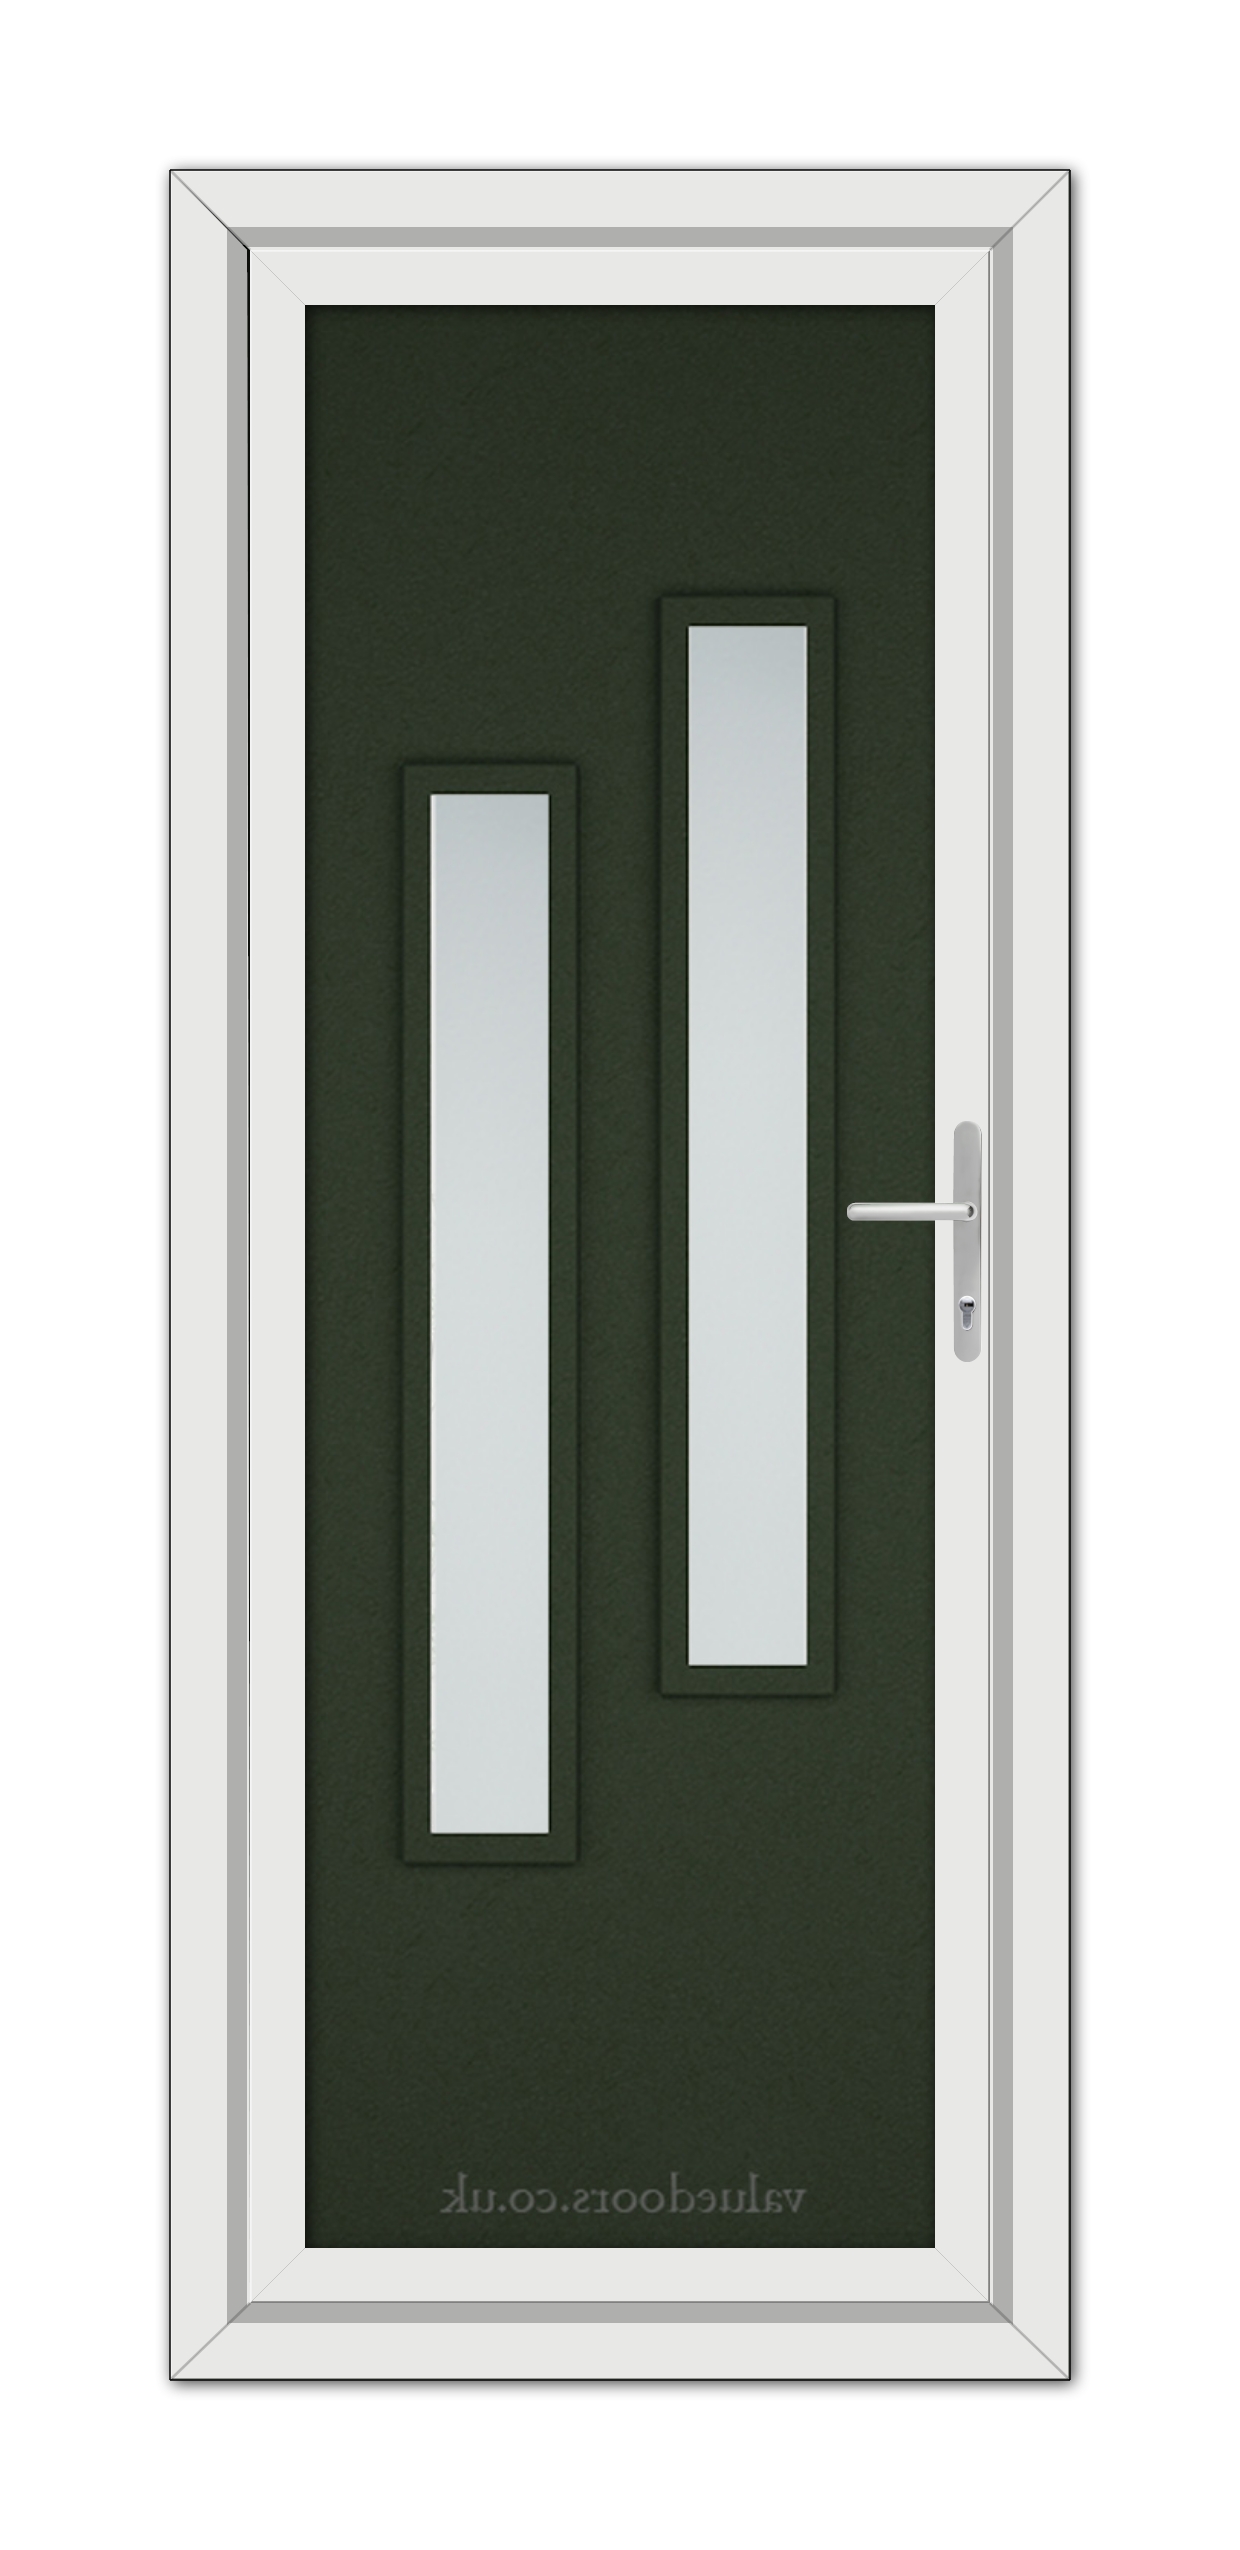 A Green Modern 5082 uPVC Door with two vertical glass panels and a white frame, featuring a sleek silver handle on the right side.